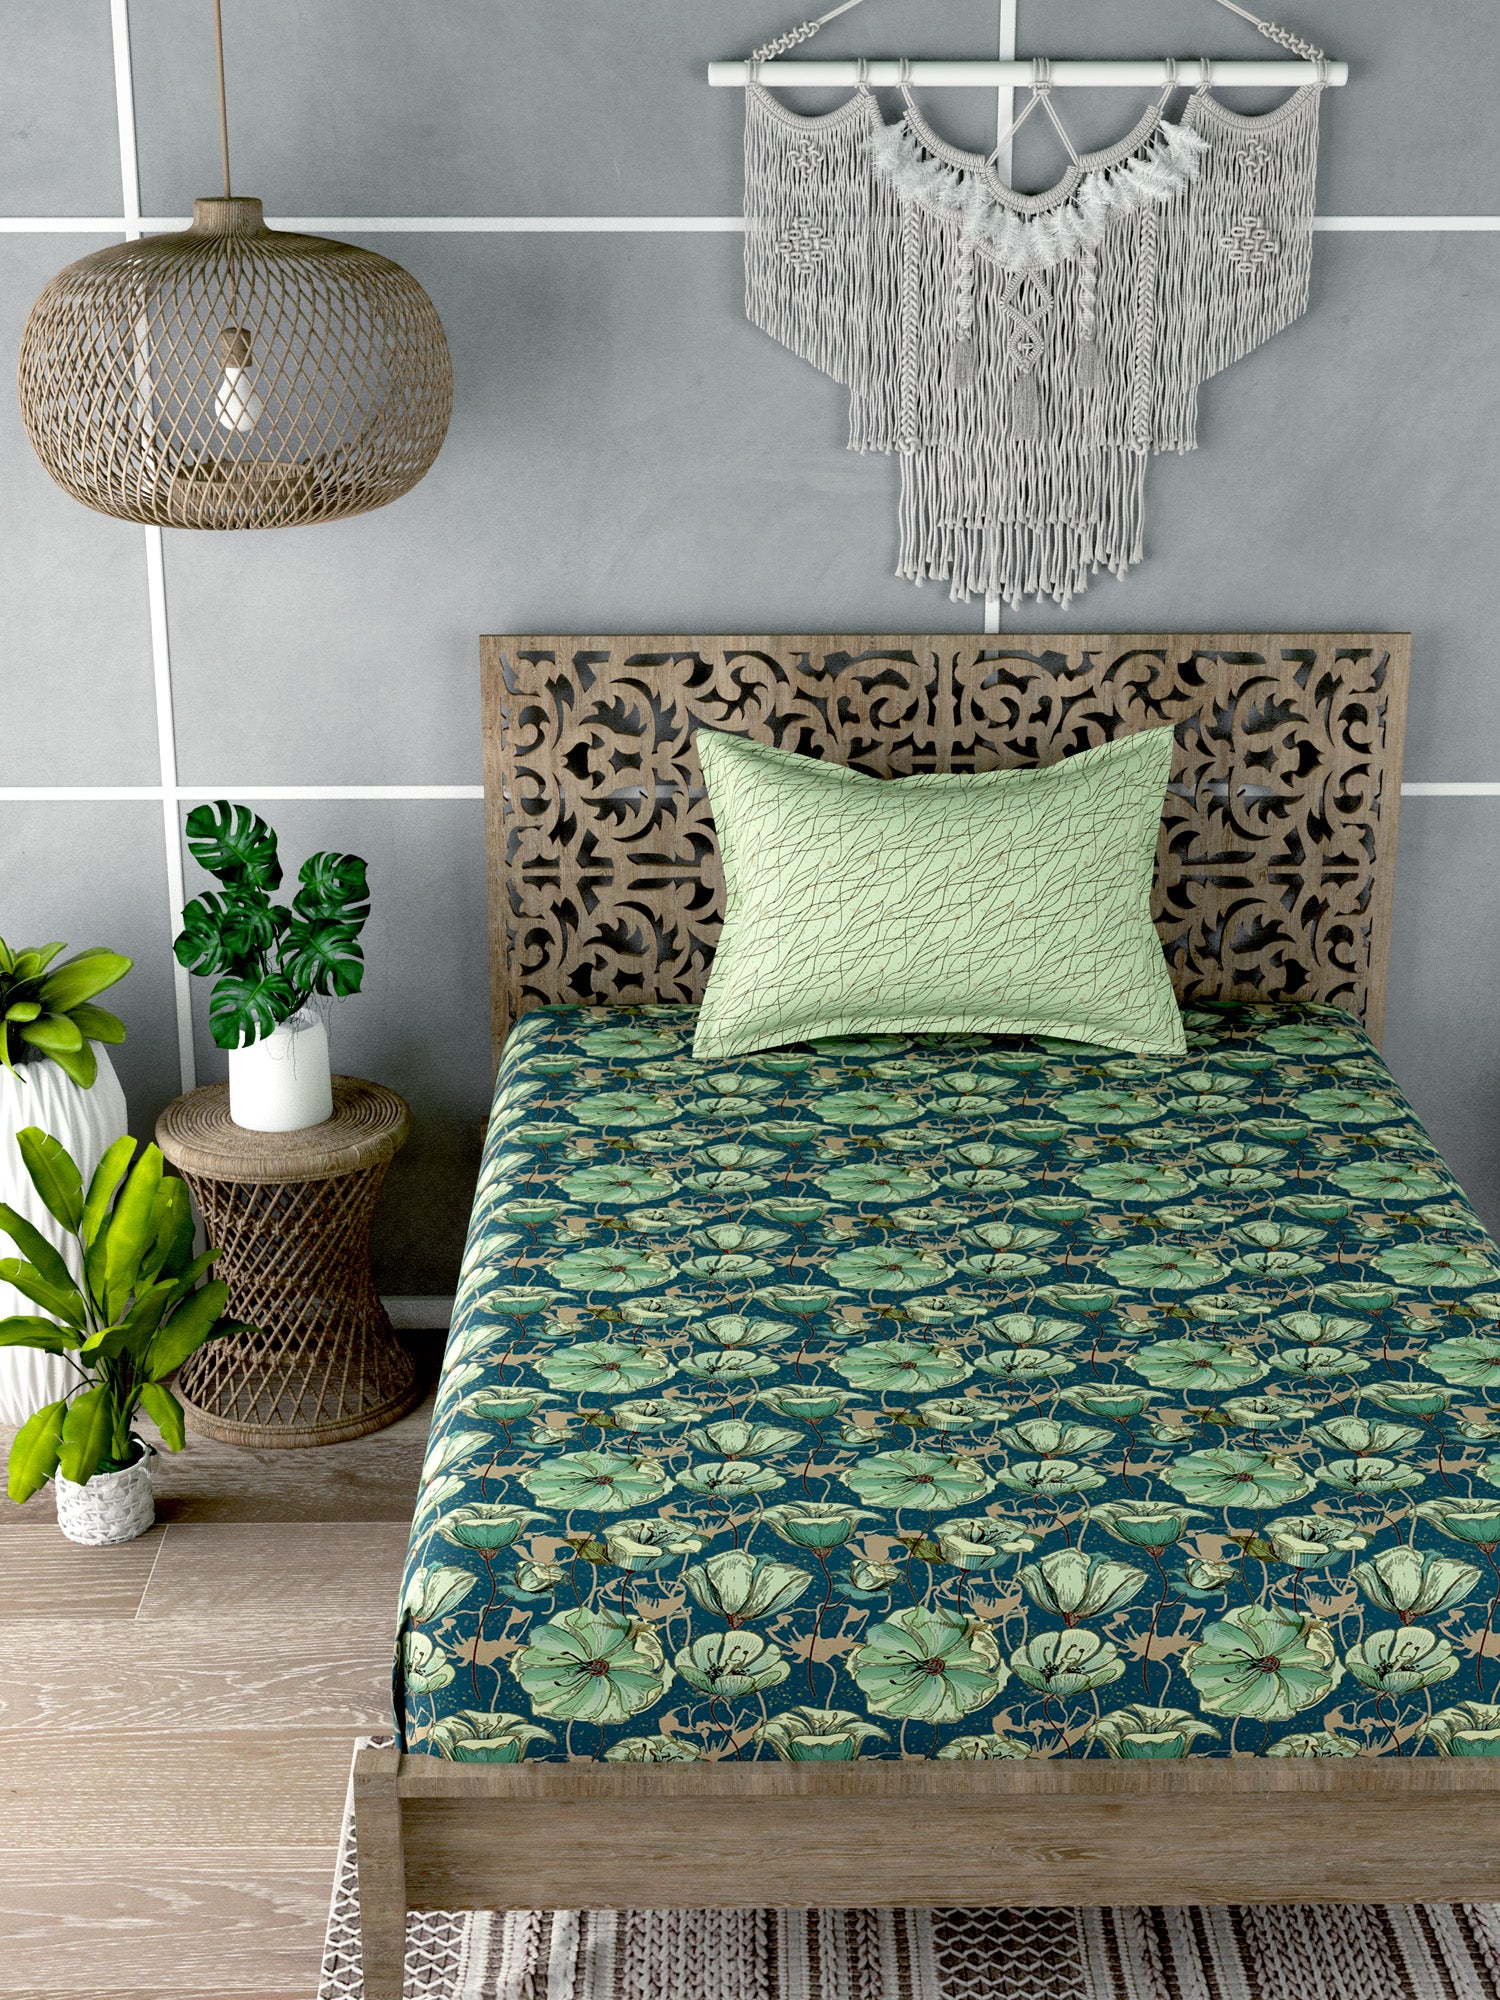 Green & Blue Floral Print Single Bedsheet with 1 Pillow Cover